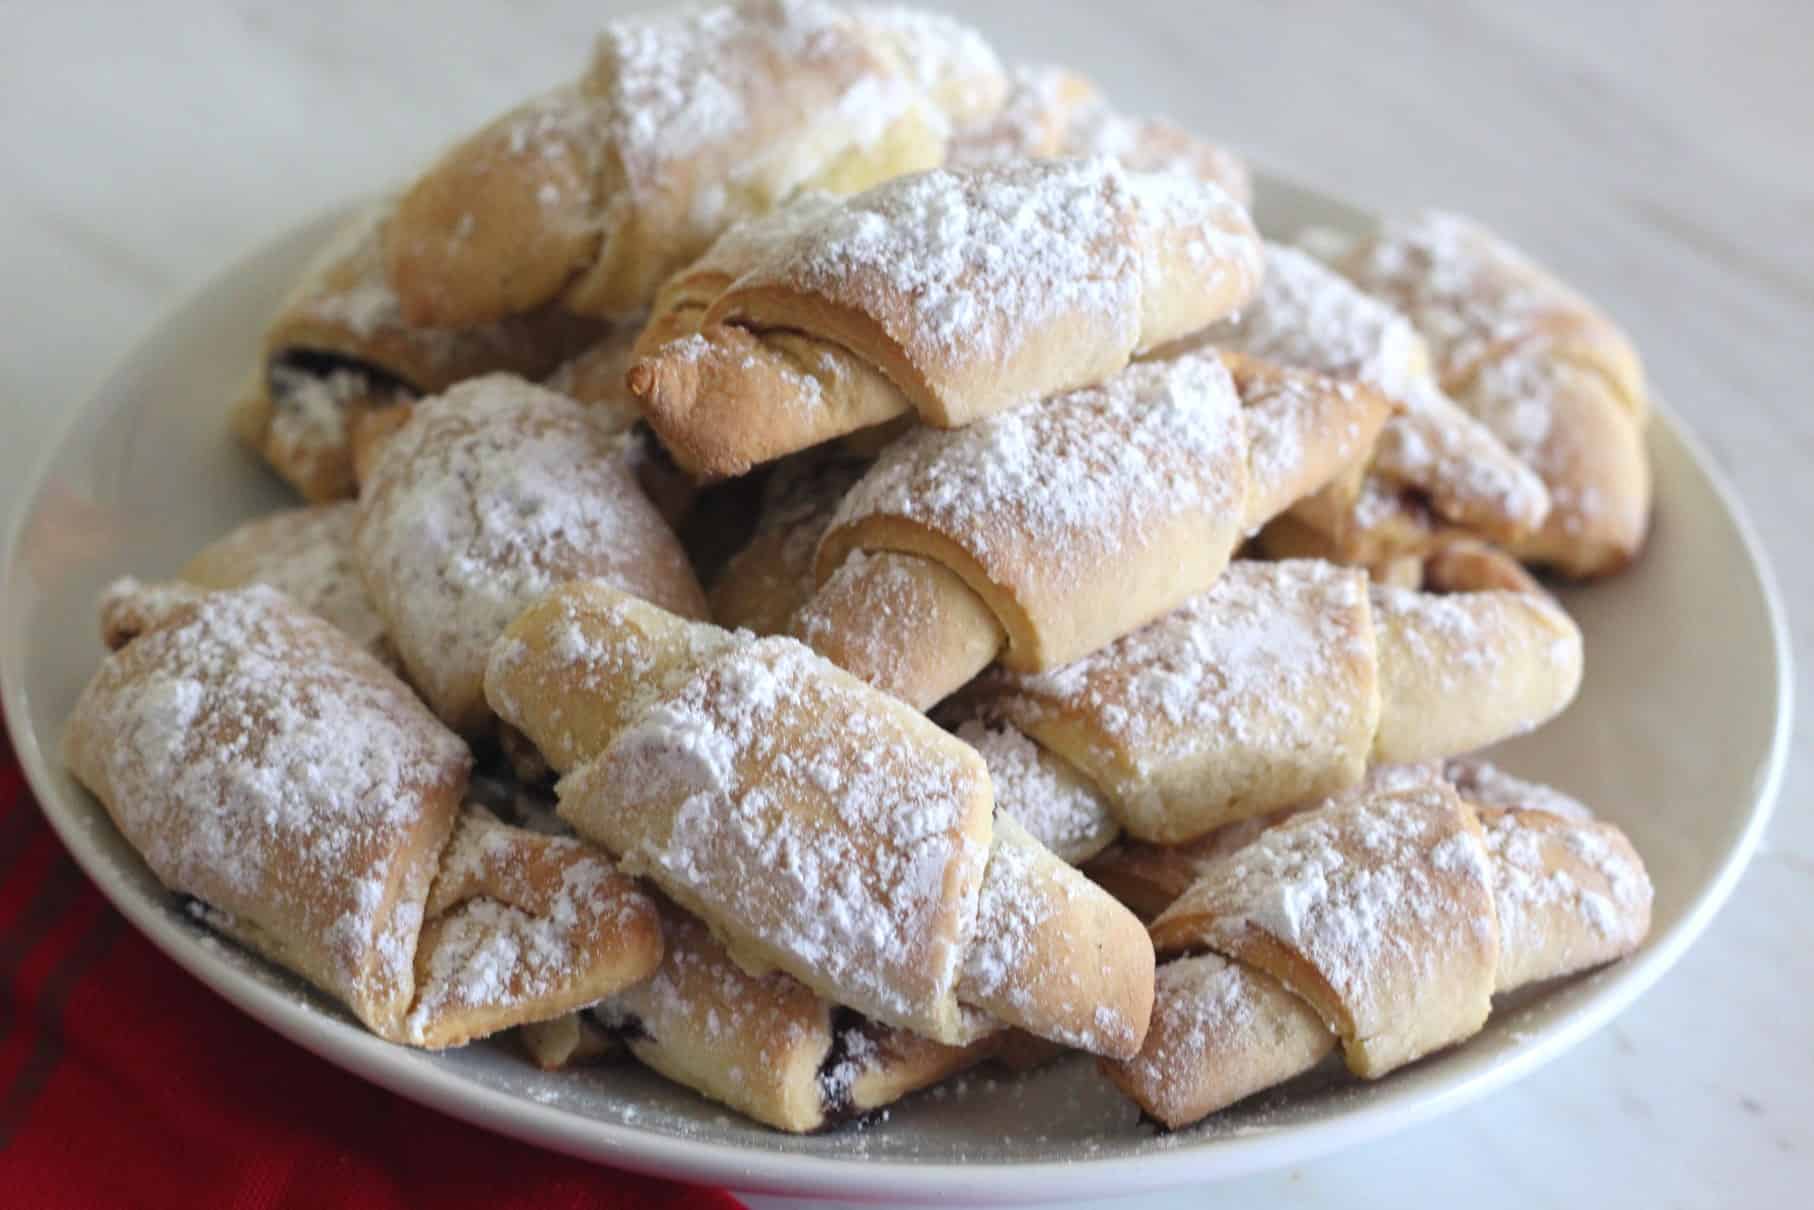 A plate with lots of rolled up crescent shape cookies that seem filled with jam.